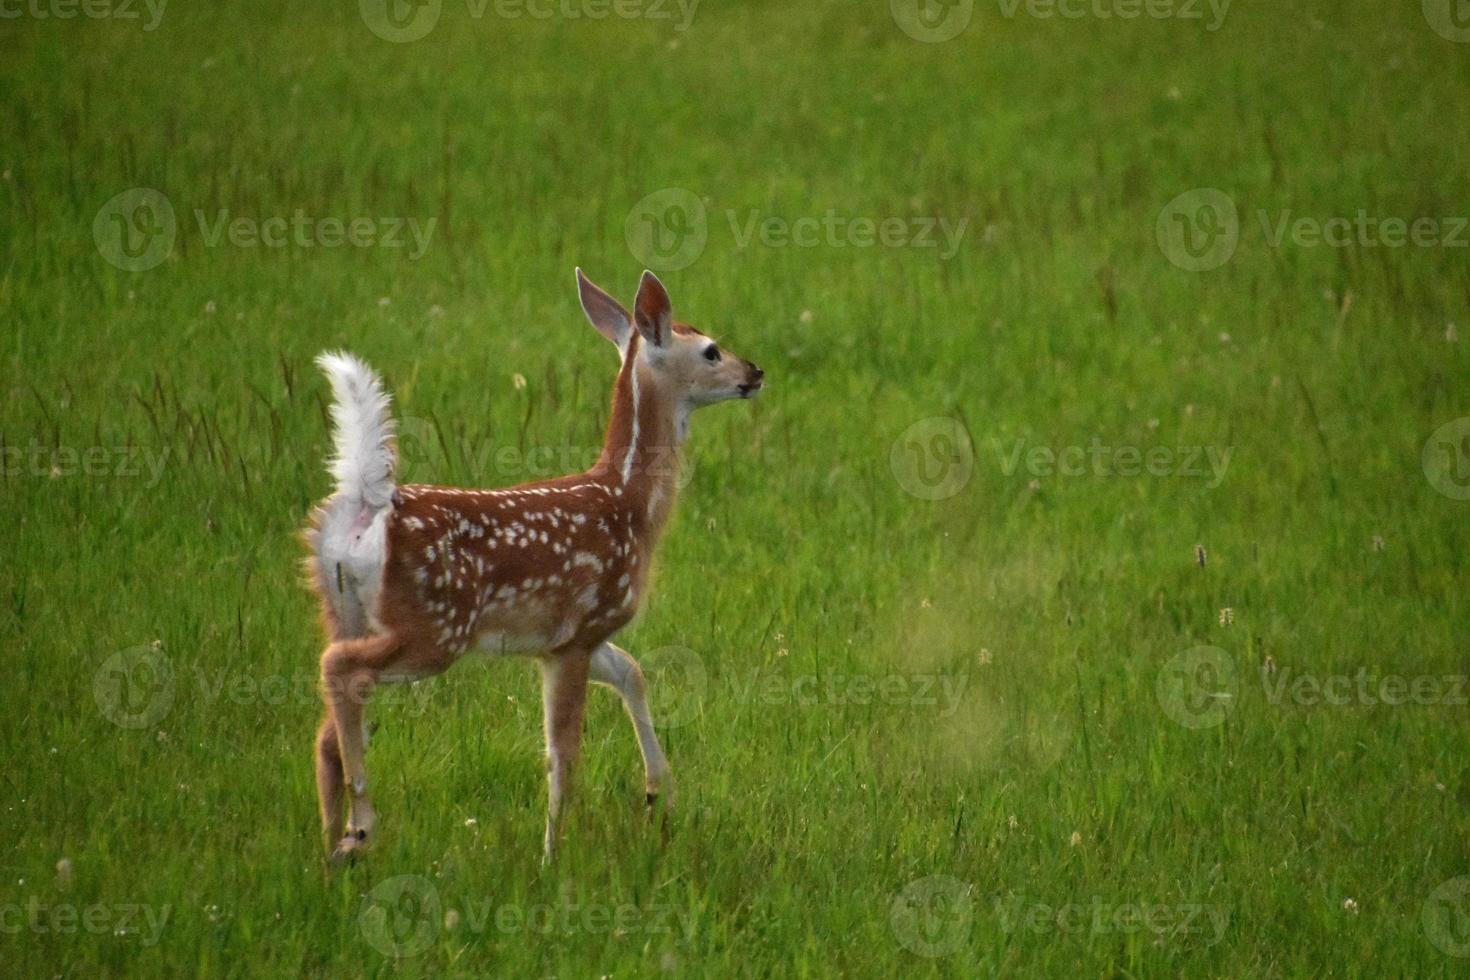 Prancing Baby Deer in a Green Grass Field photo